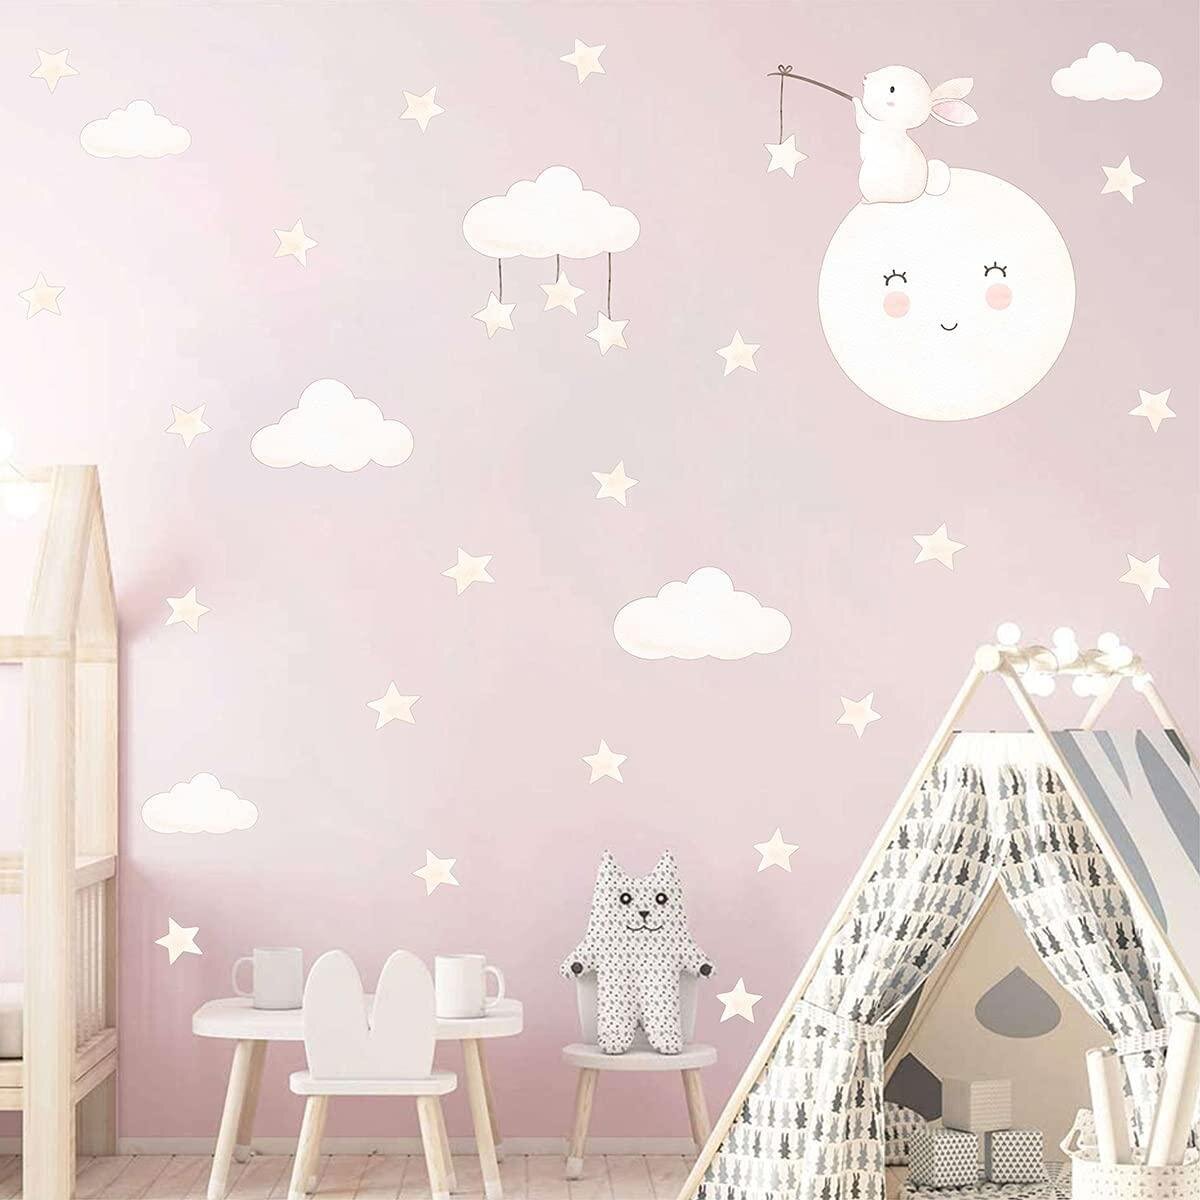 168 Triangles removable wall art stickers for Nursery or kids room Vinyl decal 